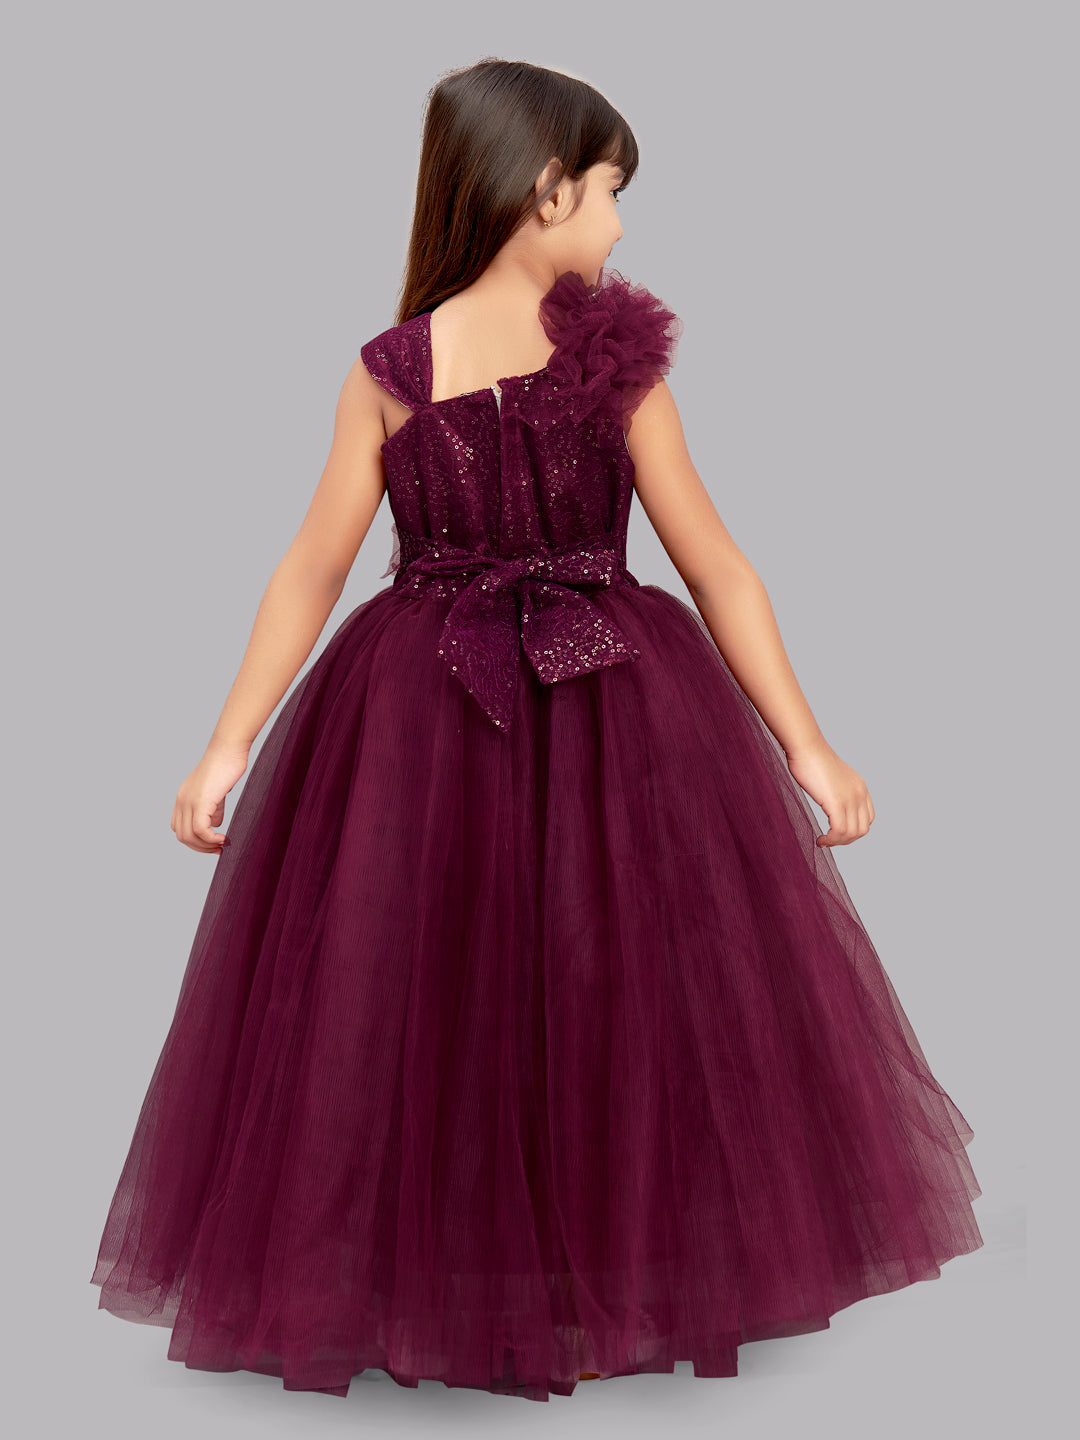 Burgundy Flower Girl Dresses For Wedding Lace Beads 3d Floral Appliqued  Little Girls Pageant Dresses Party Gowns Princess Wear - Flower Girl Dresses  - AliExpress